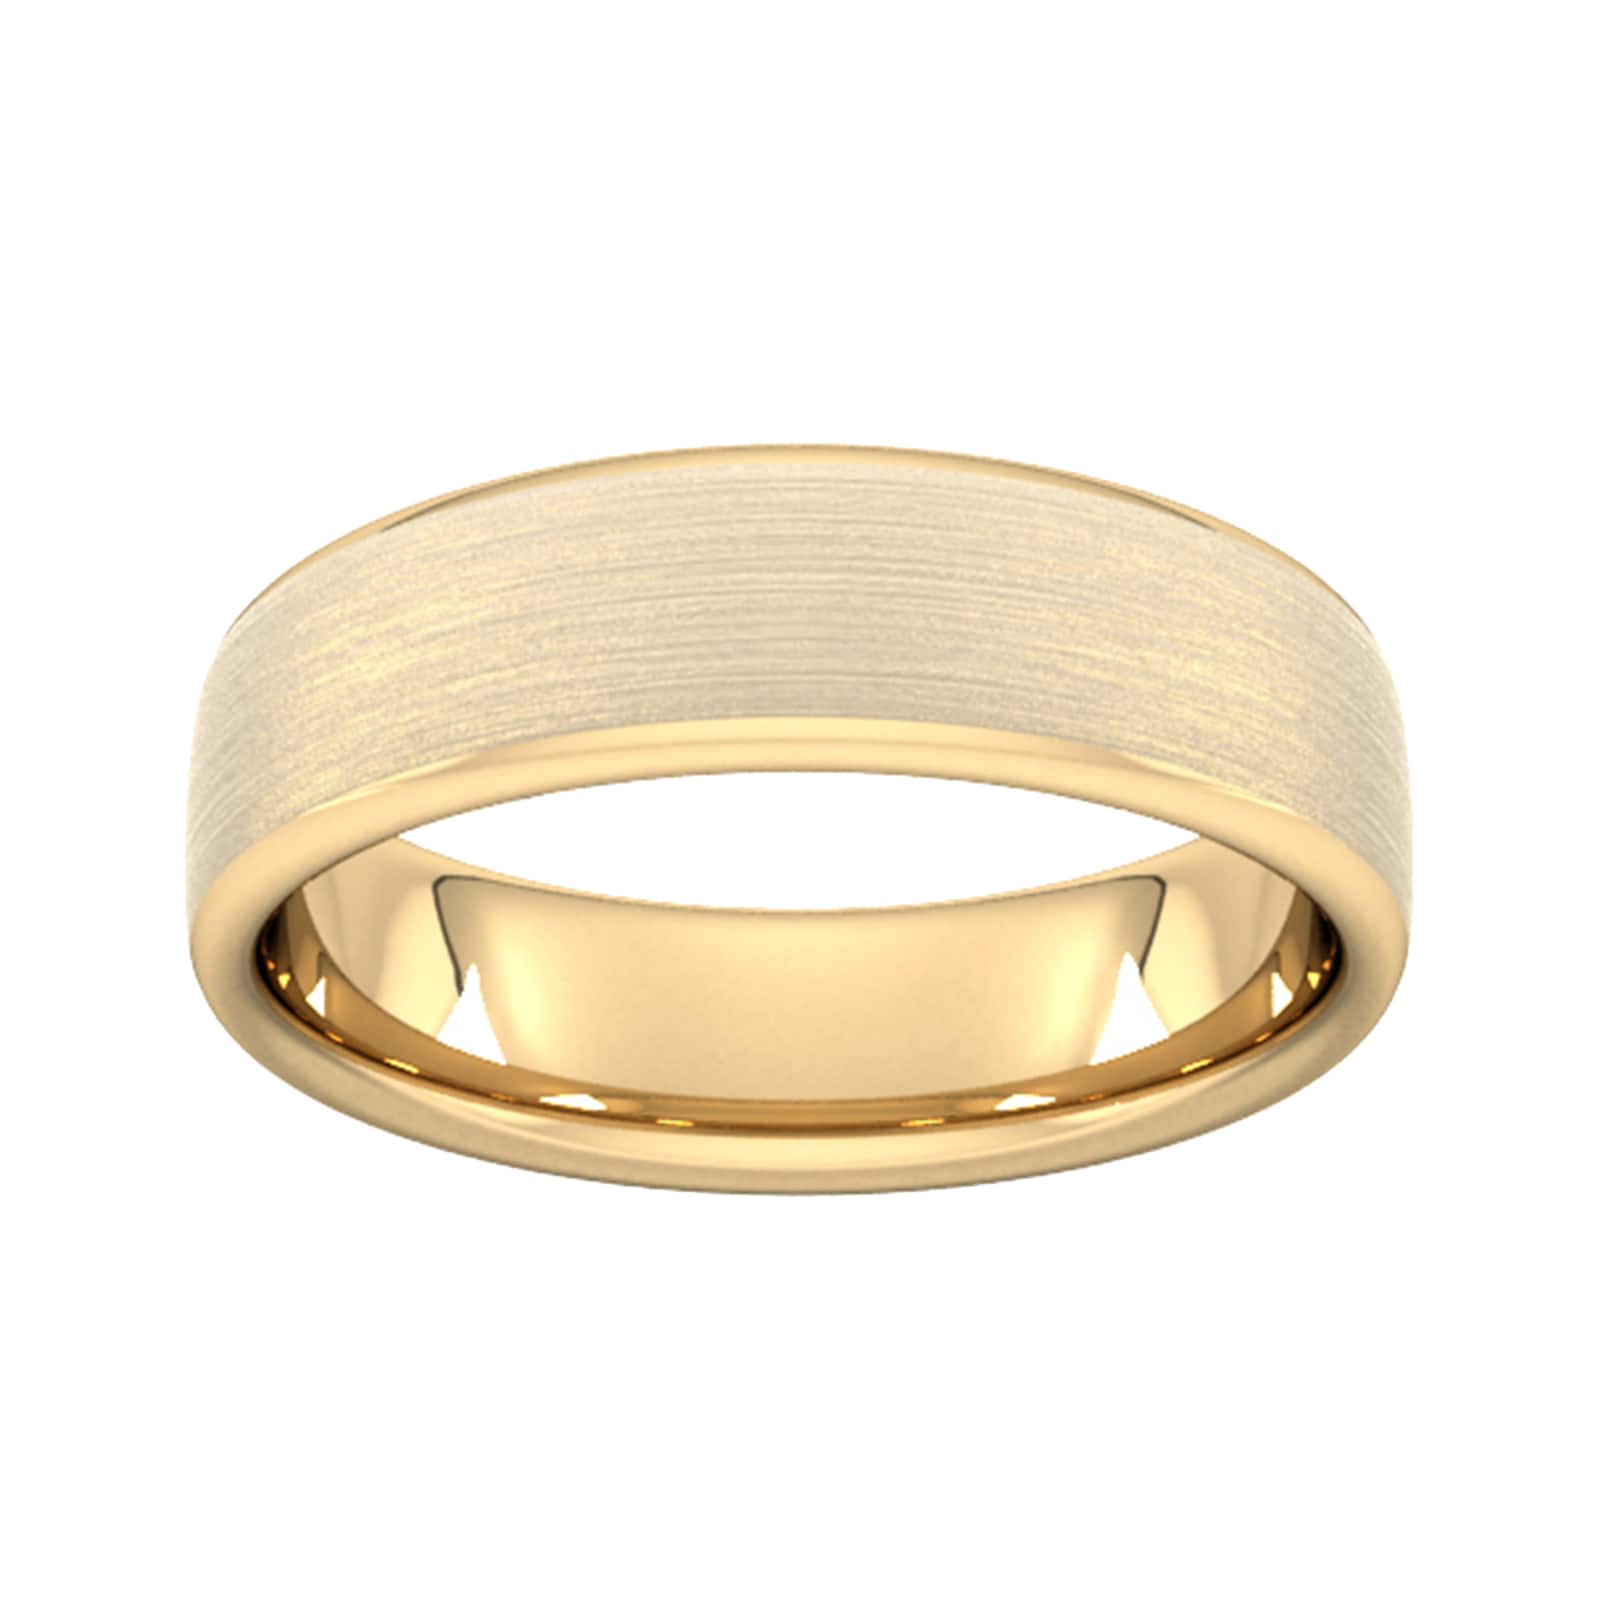 6mm D Shape Heavy Matt Finished Wedding Ring In 9 Carat Yellow Gold - Ring Size N